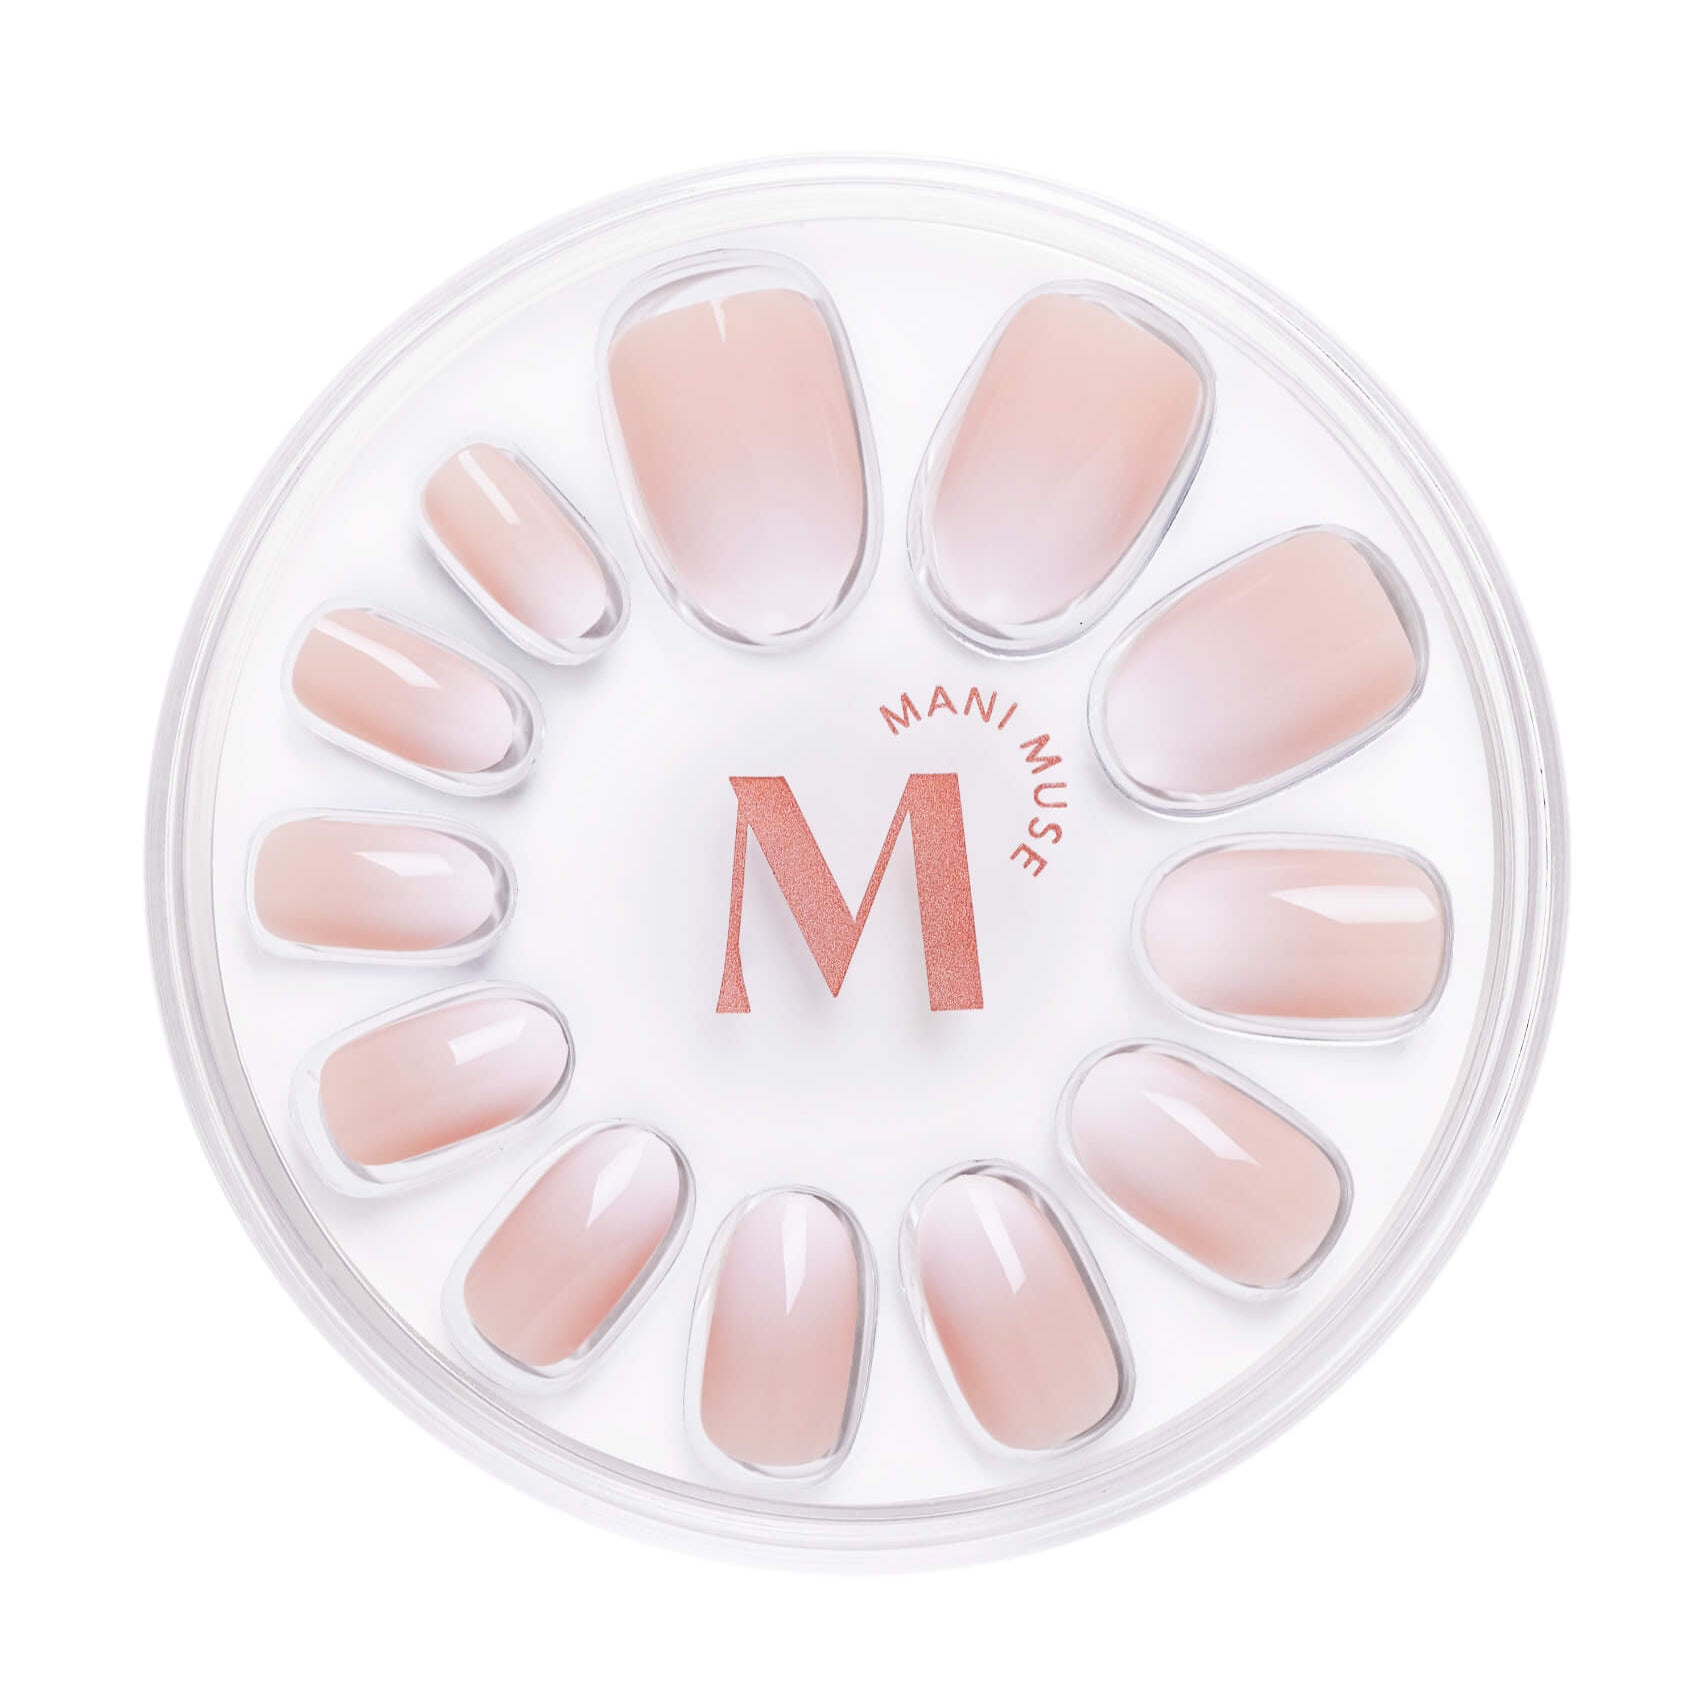 Mani Muse Good Ombres Press-On Nails - Oval